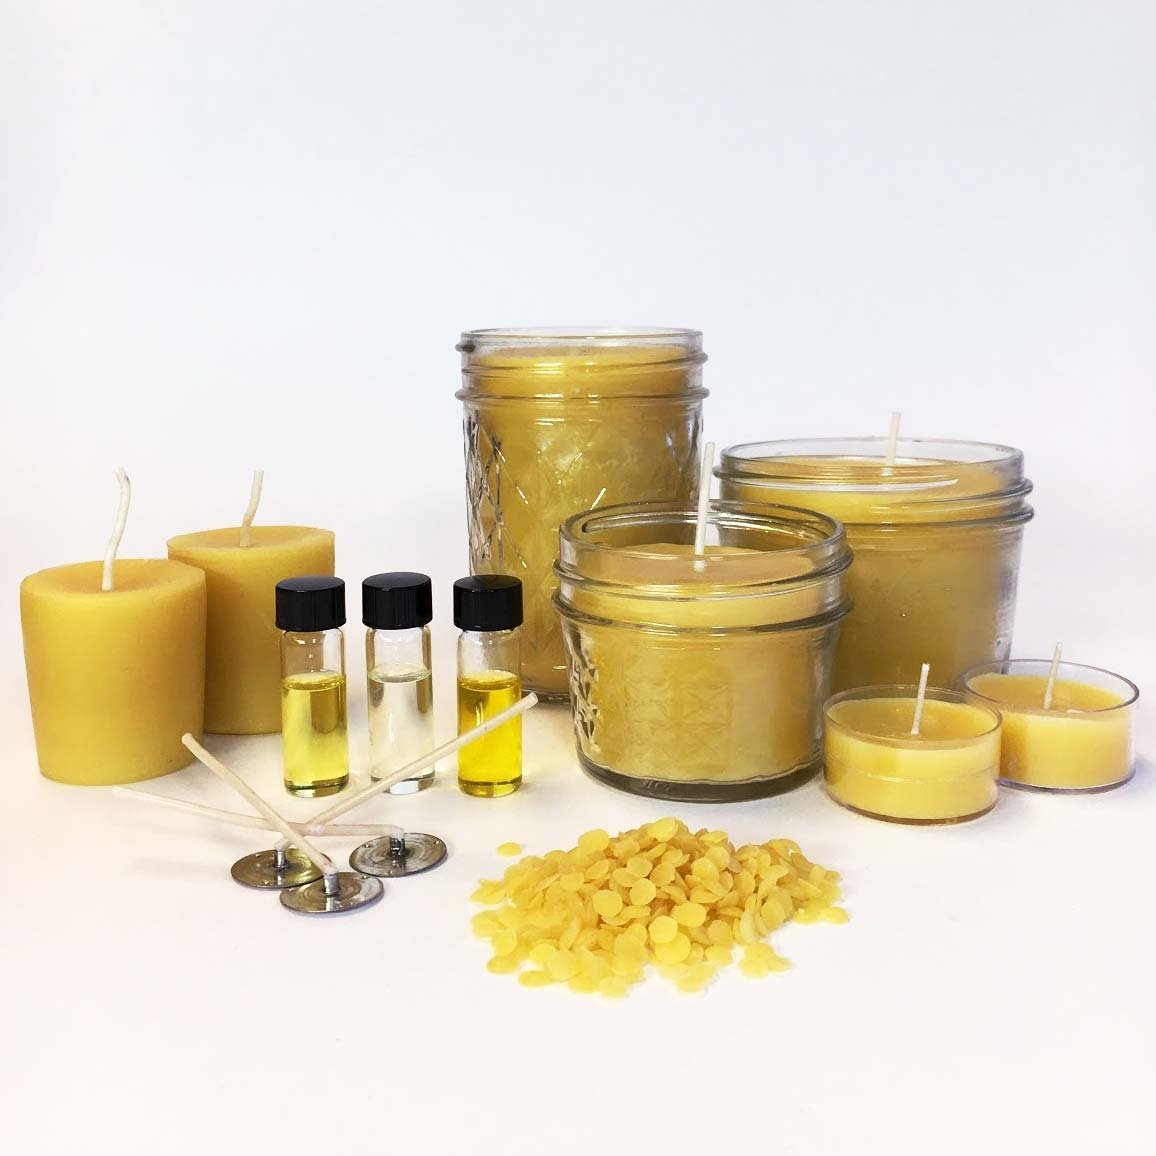 What Oils Do You Use For Candle Making